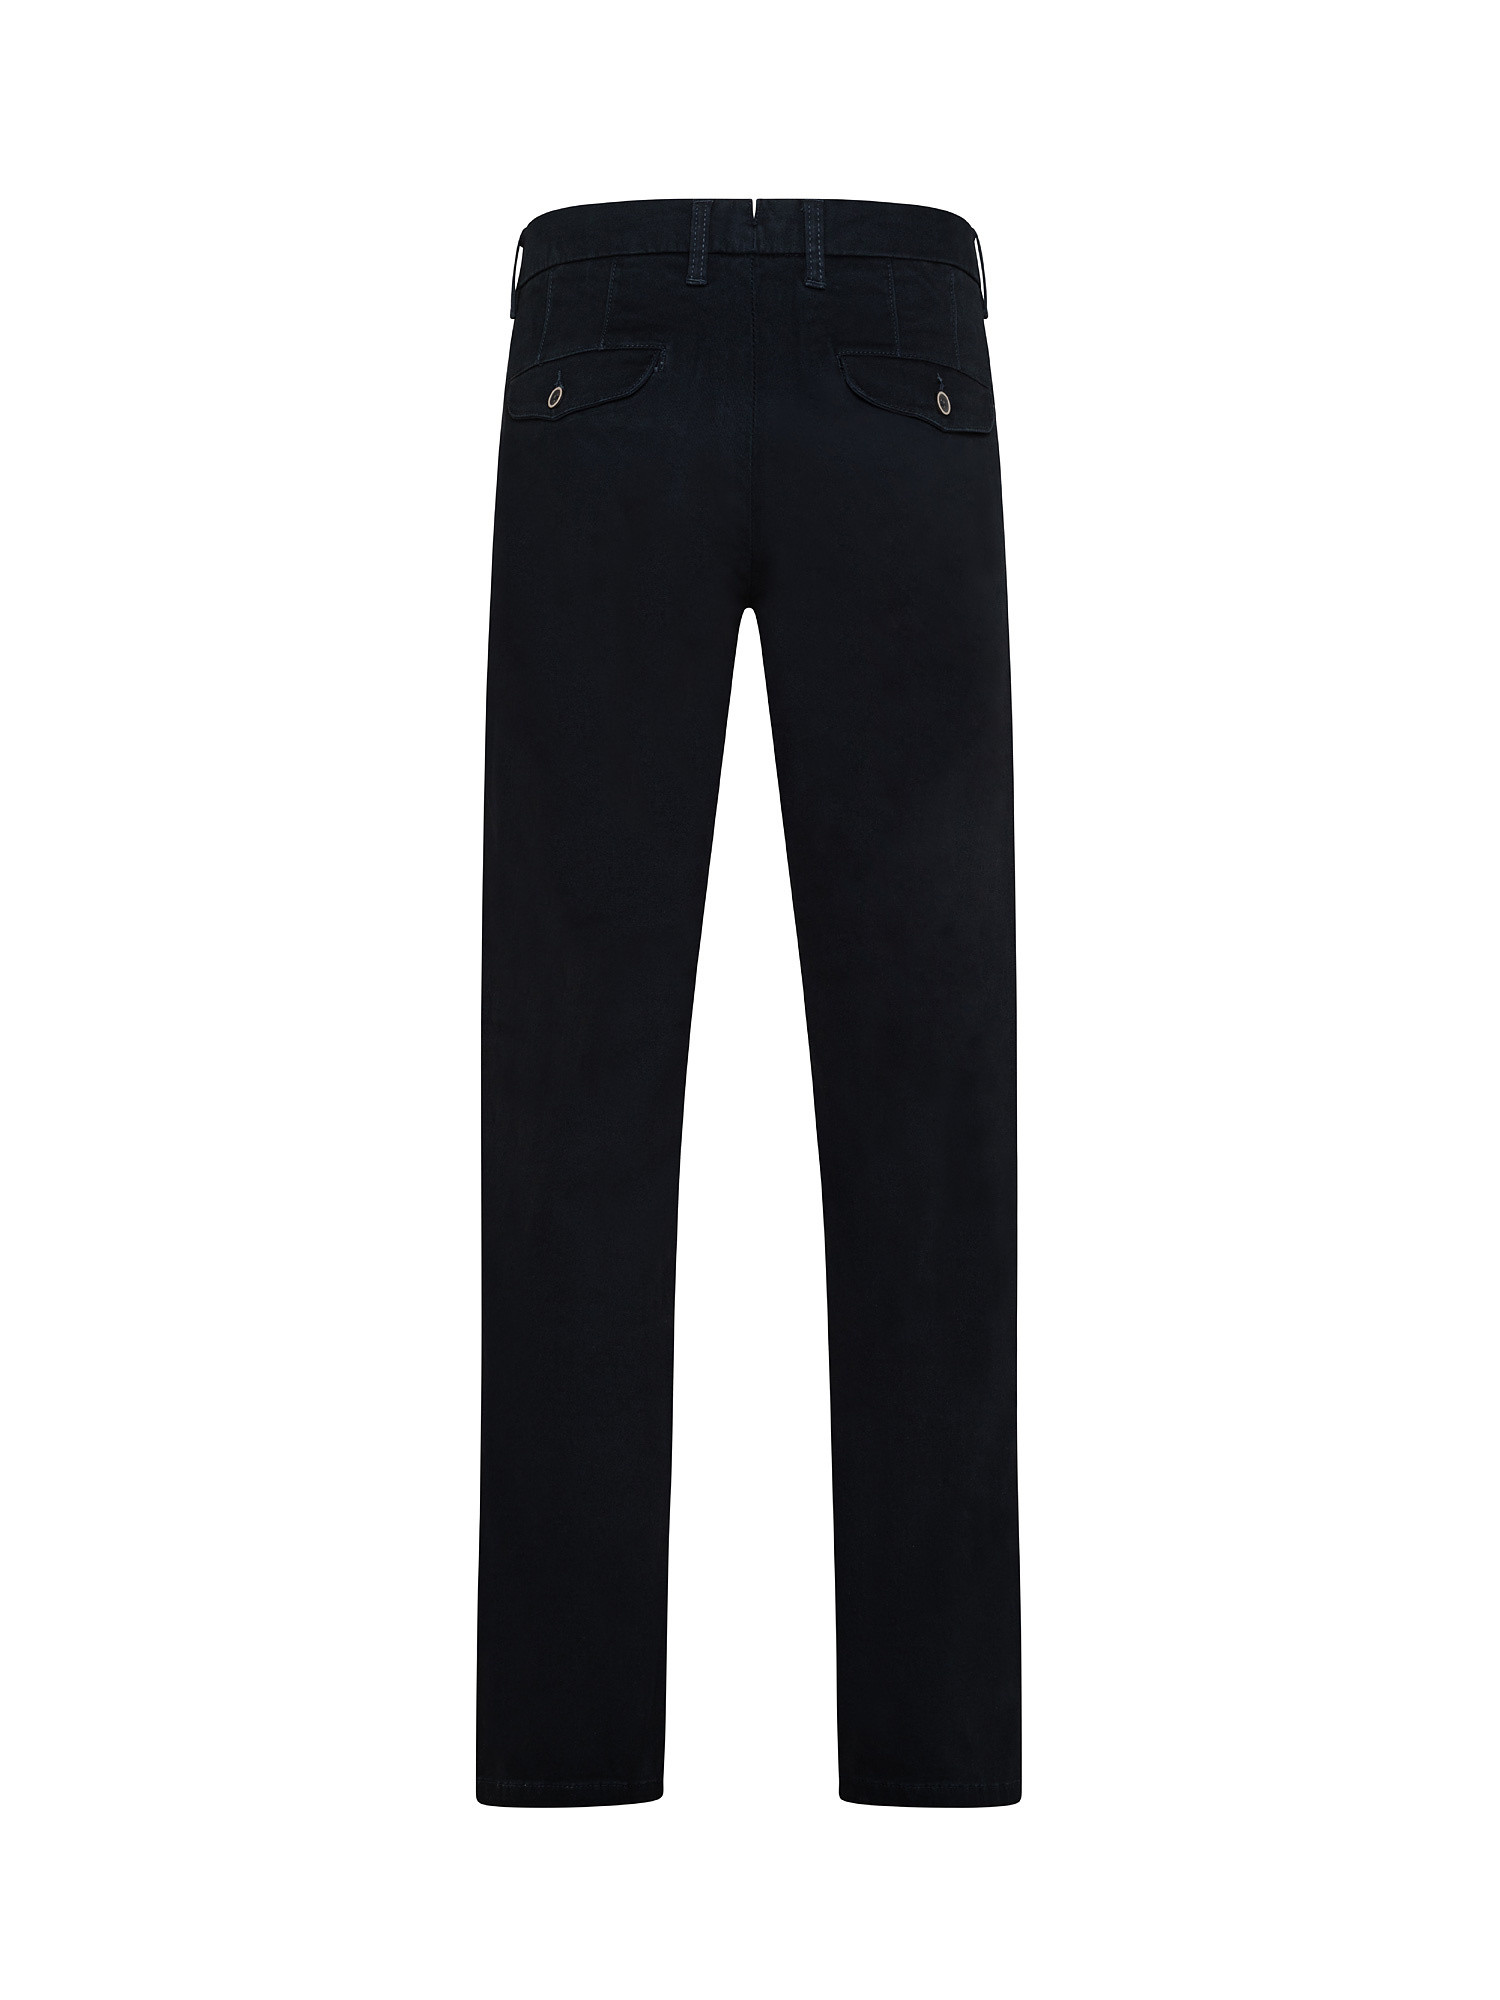 Chino trousers, Black, large image number 1